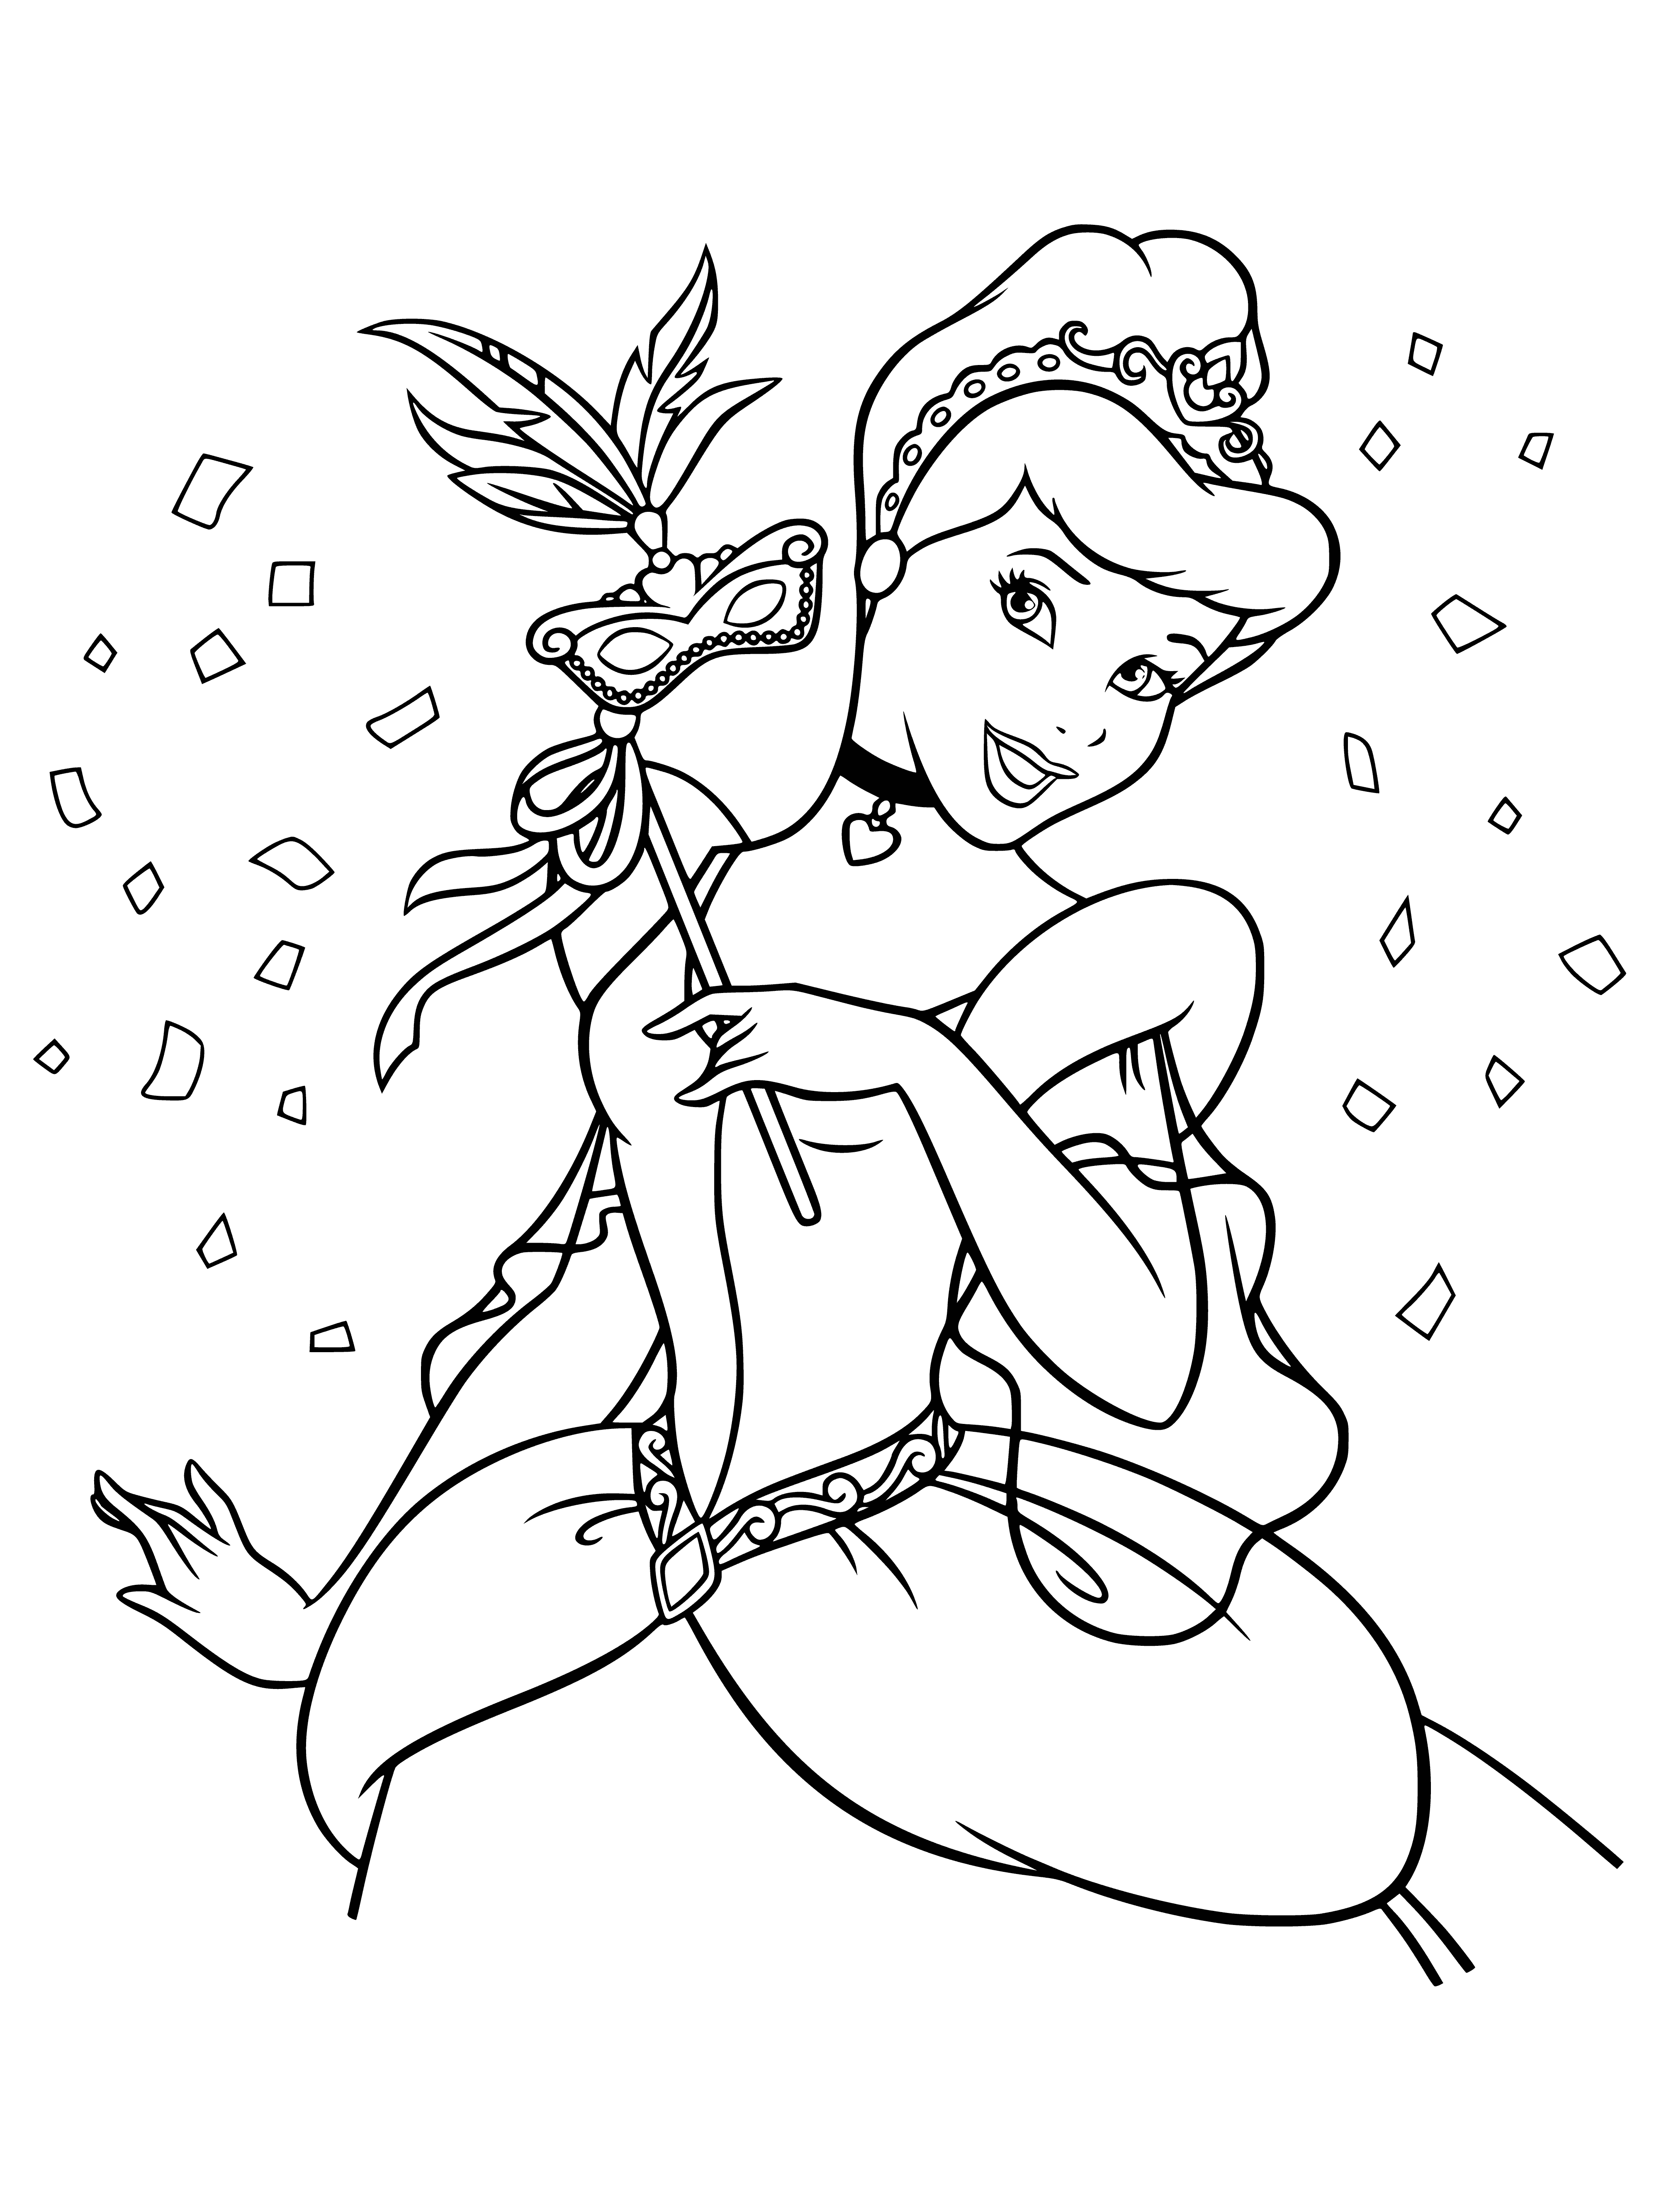 coloring page: Masked Cinderella is a victimised beauty who is helped to attend a ball and find true love.